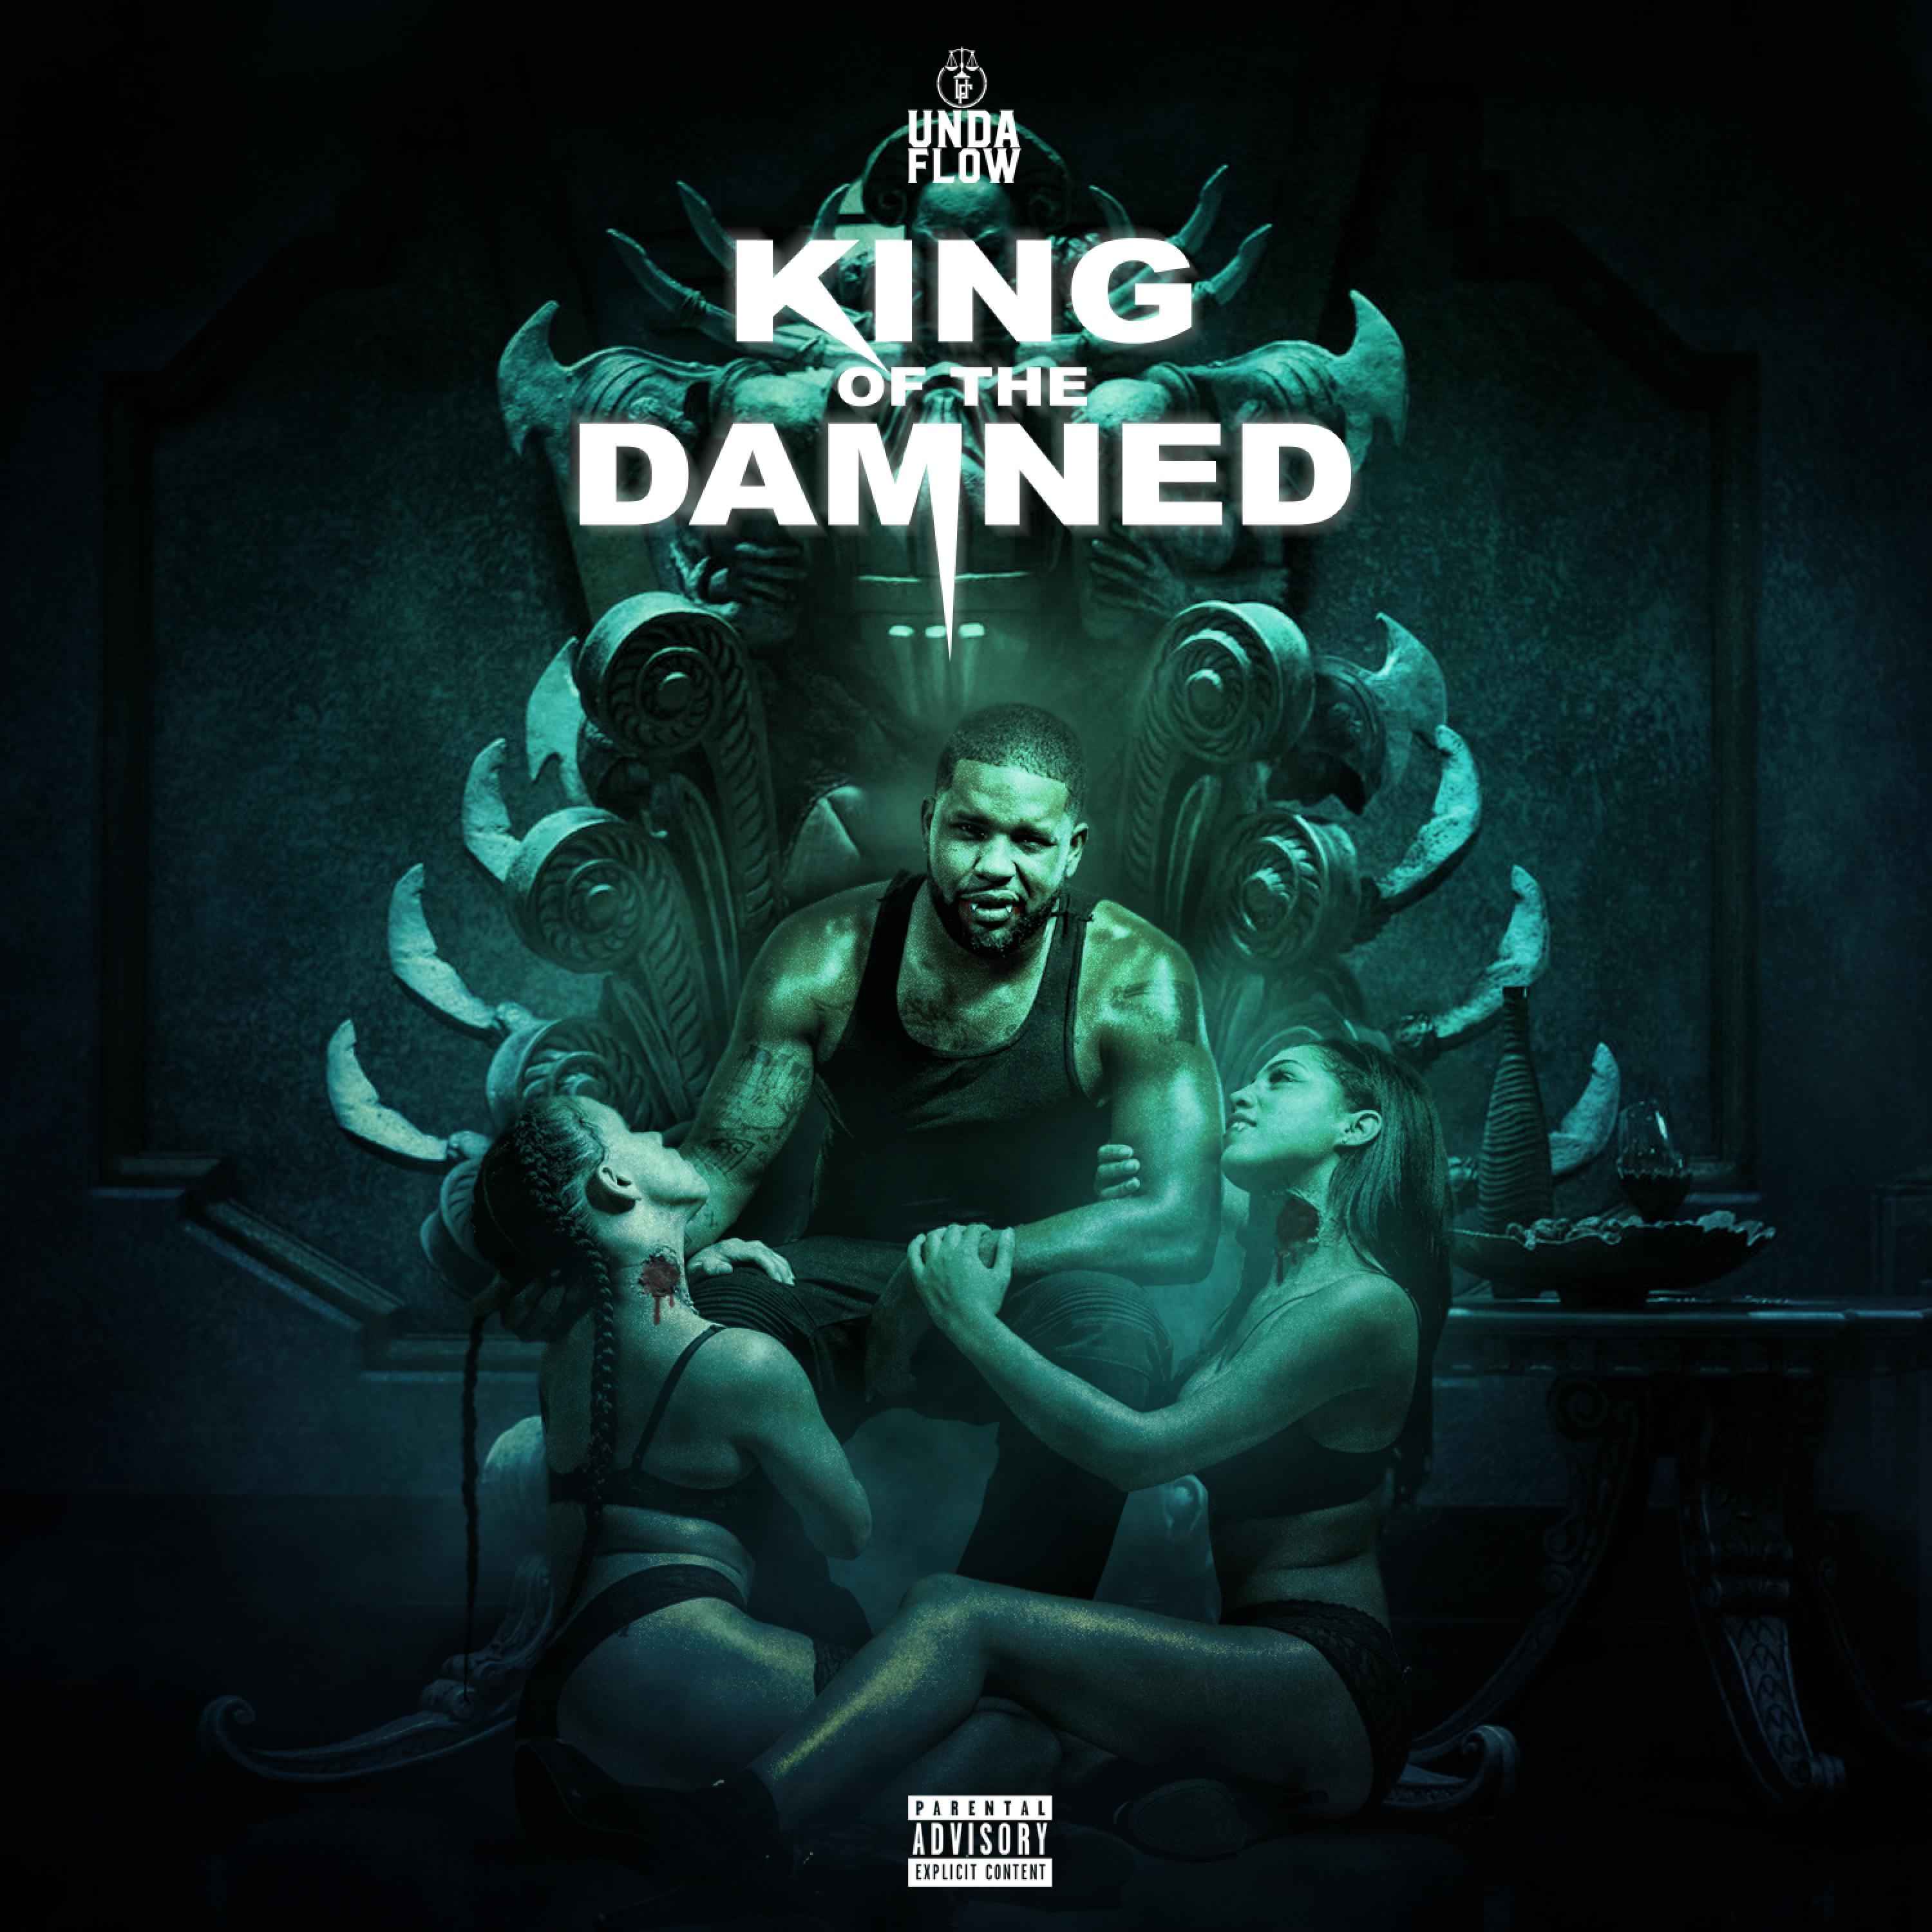 King of the Damned